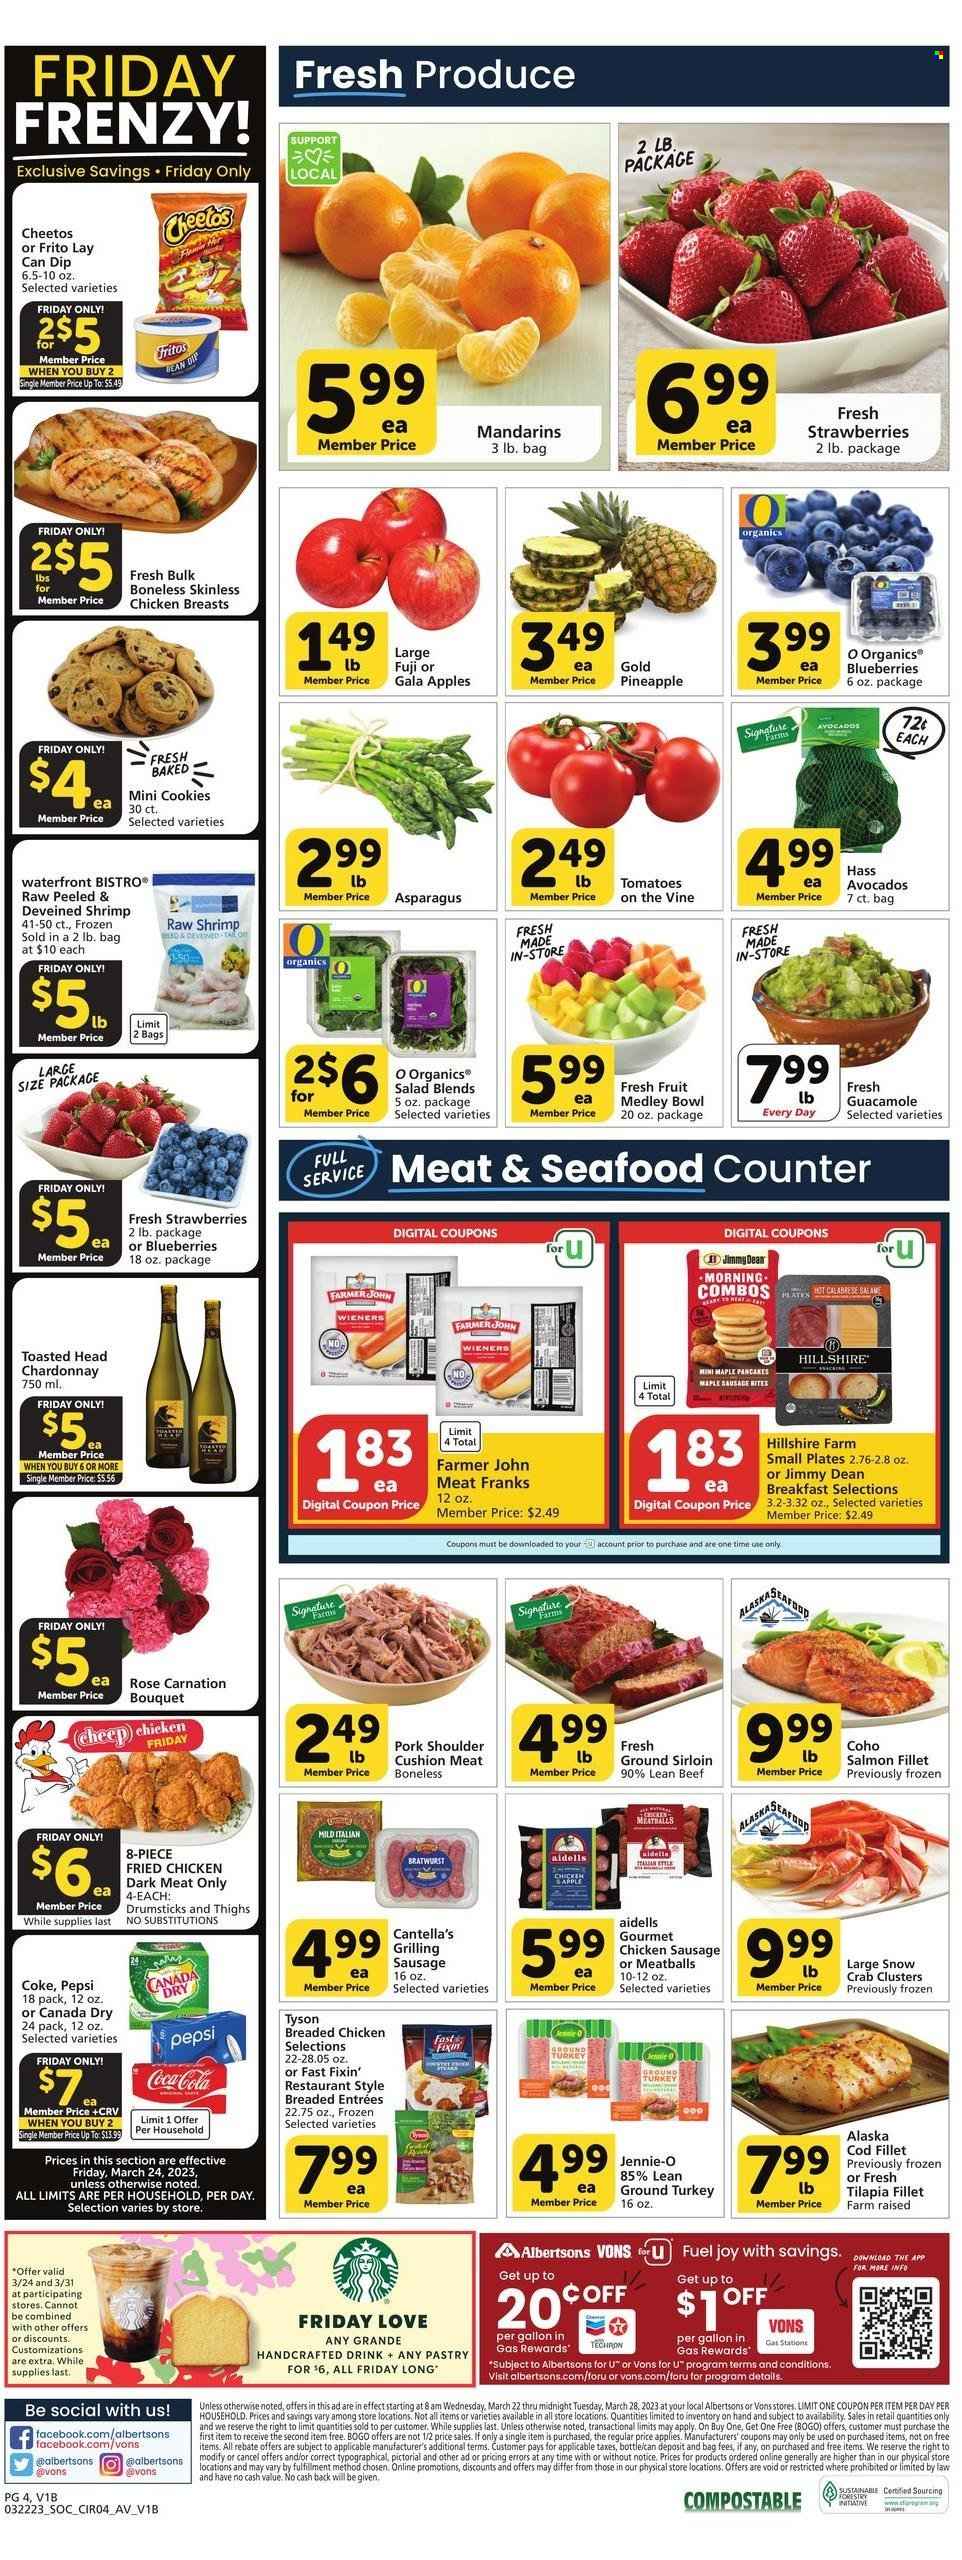 thumbnail - Vons Flyer - 03/22/2023 - 03/28/2023 - Sales products - asparagus, tomatoes, salad, apples, blueberries, Gala, mandarines, strawberries, pineapple, ground turkey, Fast Fixin', beef meat, pork meat, pork shoulder, cod, salmon, salmon fillet, tilapia, seafood, crab, shrimps, meatballs, fried chicken, pancakes, Jimmy Dean, Hillshire Farm, bratwurst, sausage, chicken sausage, guacamole, dip, cookies, Fritos, Cheetos, Canada Dry, Coca-Cola, Pepsi, Coke, white wine, Chardonnay, wine, rosé wine, Joy, plate, bouquet, rose. Page 4.